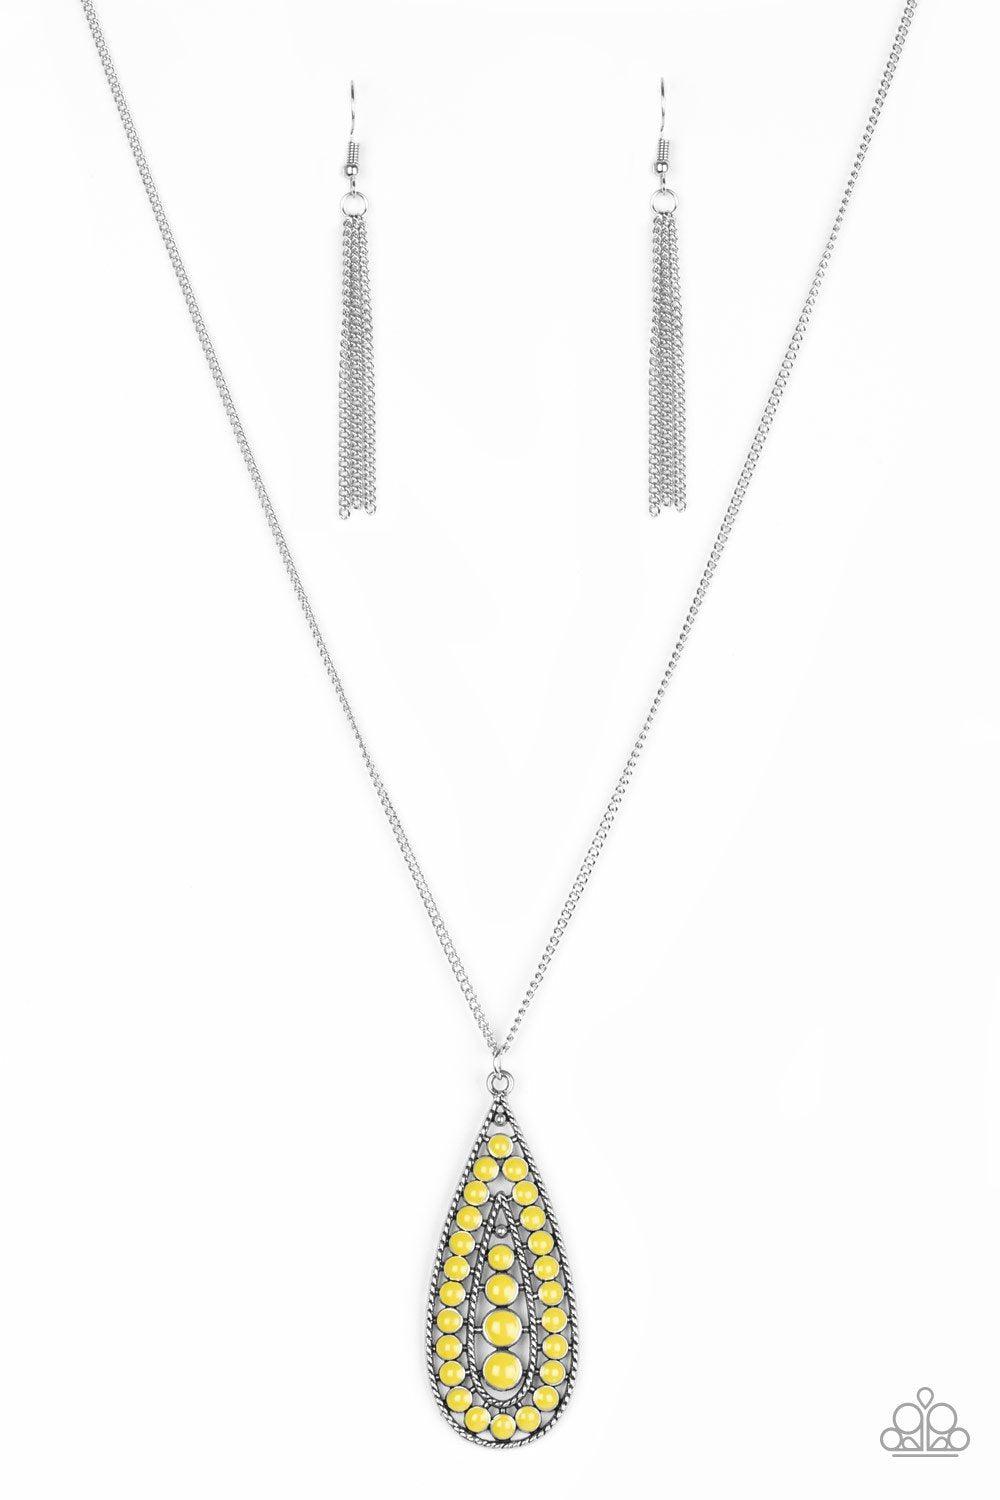 Tiki Tease Silver and Yellow Teardrop Necklace - Paparazzi Accessories-CarasShop.com - $5 Jewelry by Cara Jewels